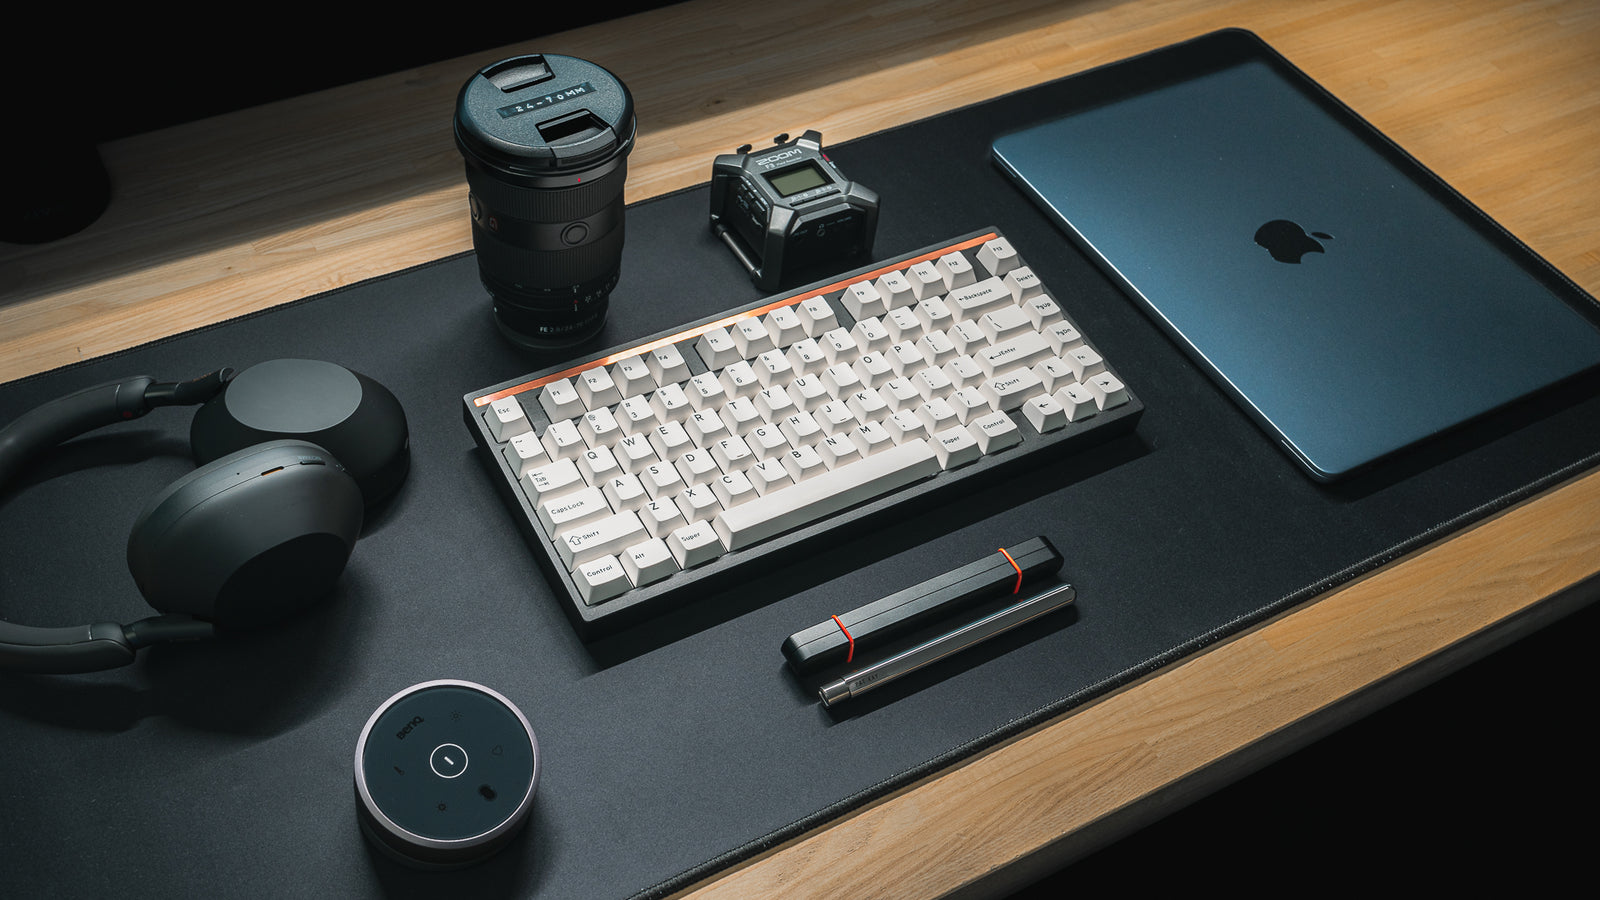 My favourite tech and desk accessories this year - Pat Kay